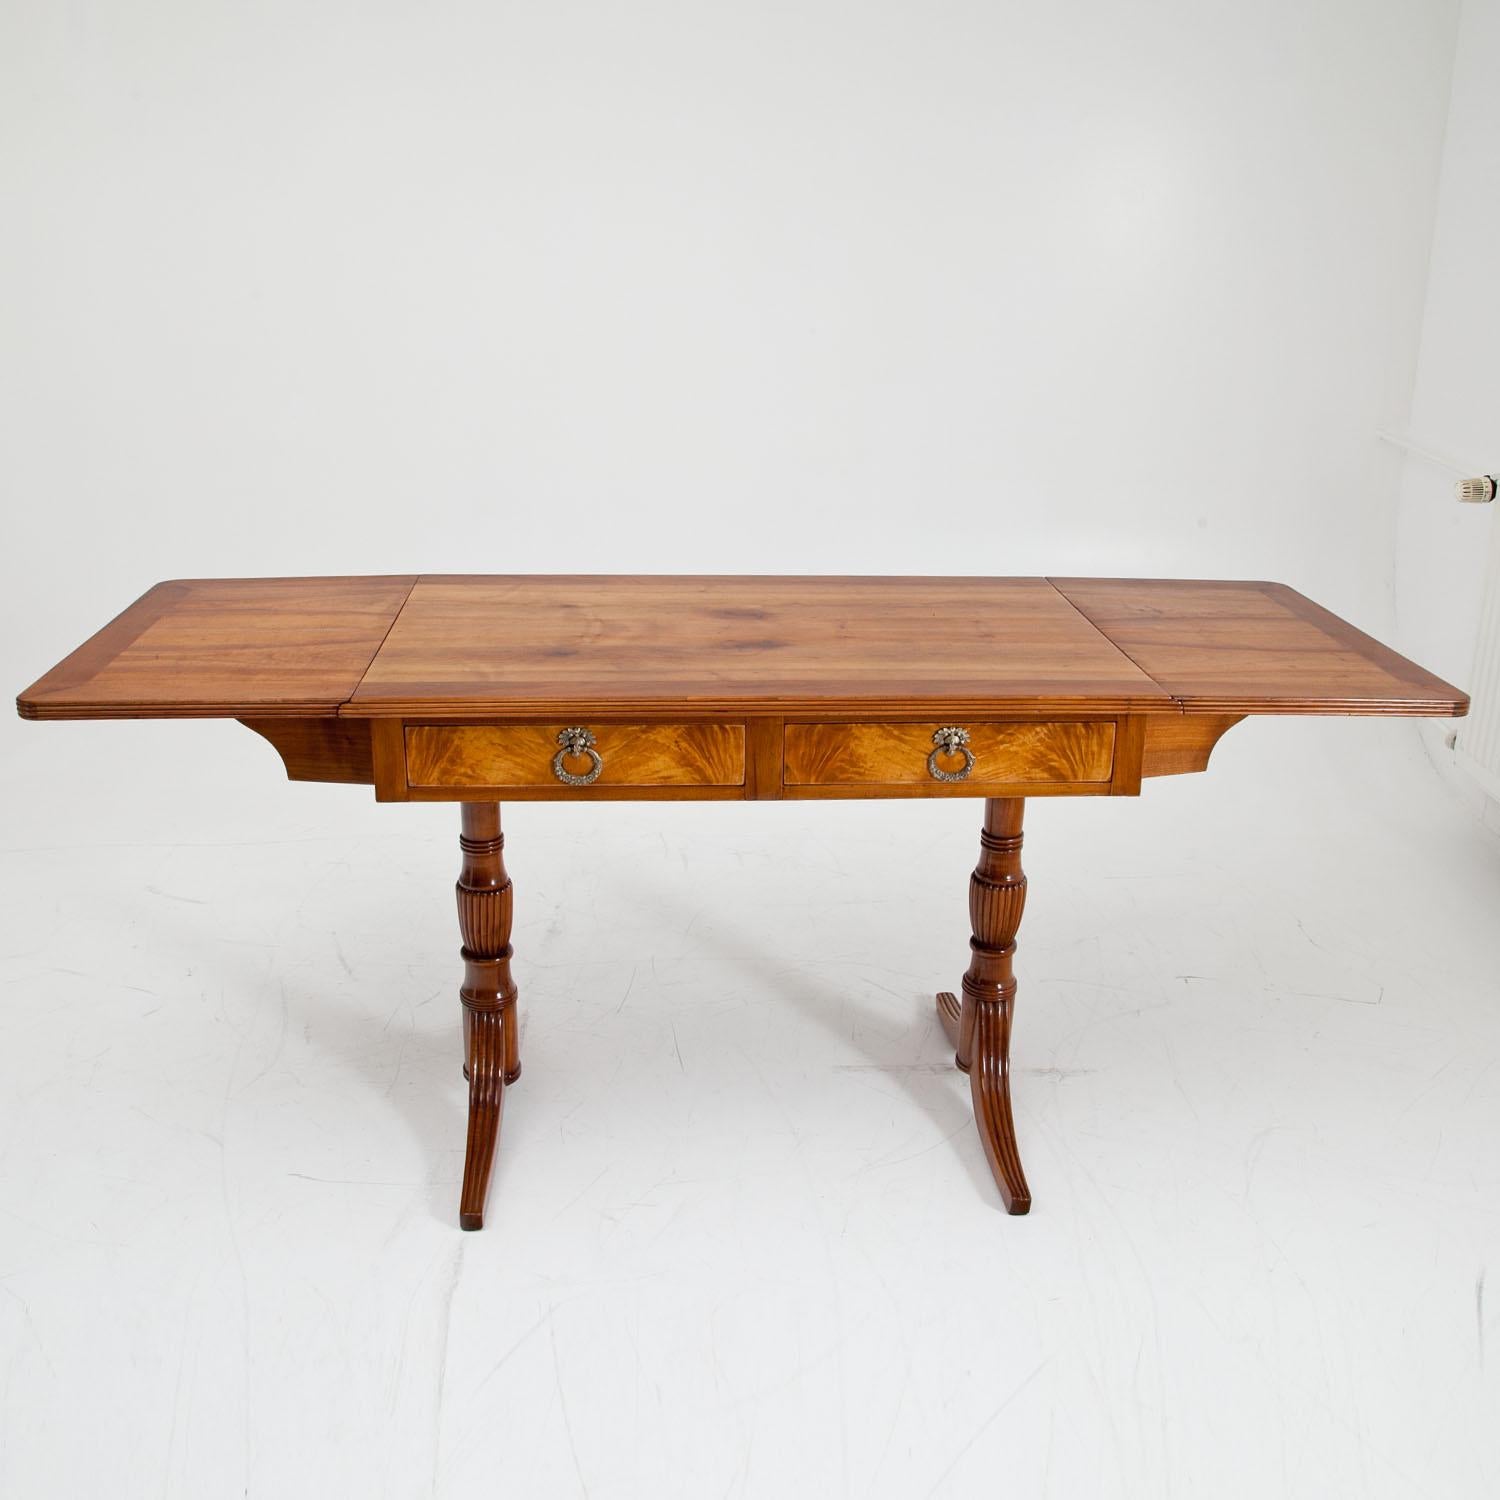 English style cherry Desk from Northern Germany with two drawers, standing on vase-shaped legs with groove decorations. The tabletop has a total length including the folds of 94 cm. The back shows blended drawers in the same style as the front.